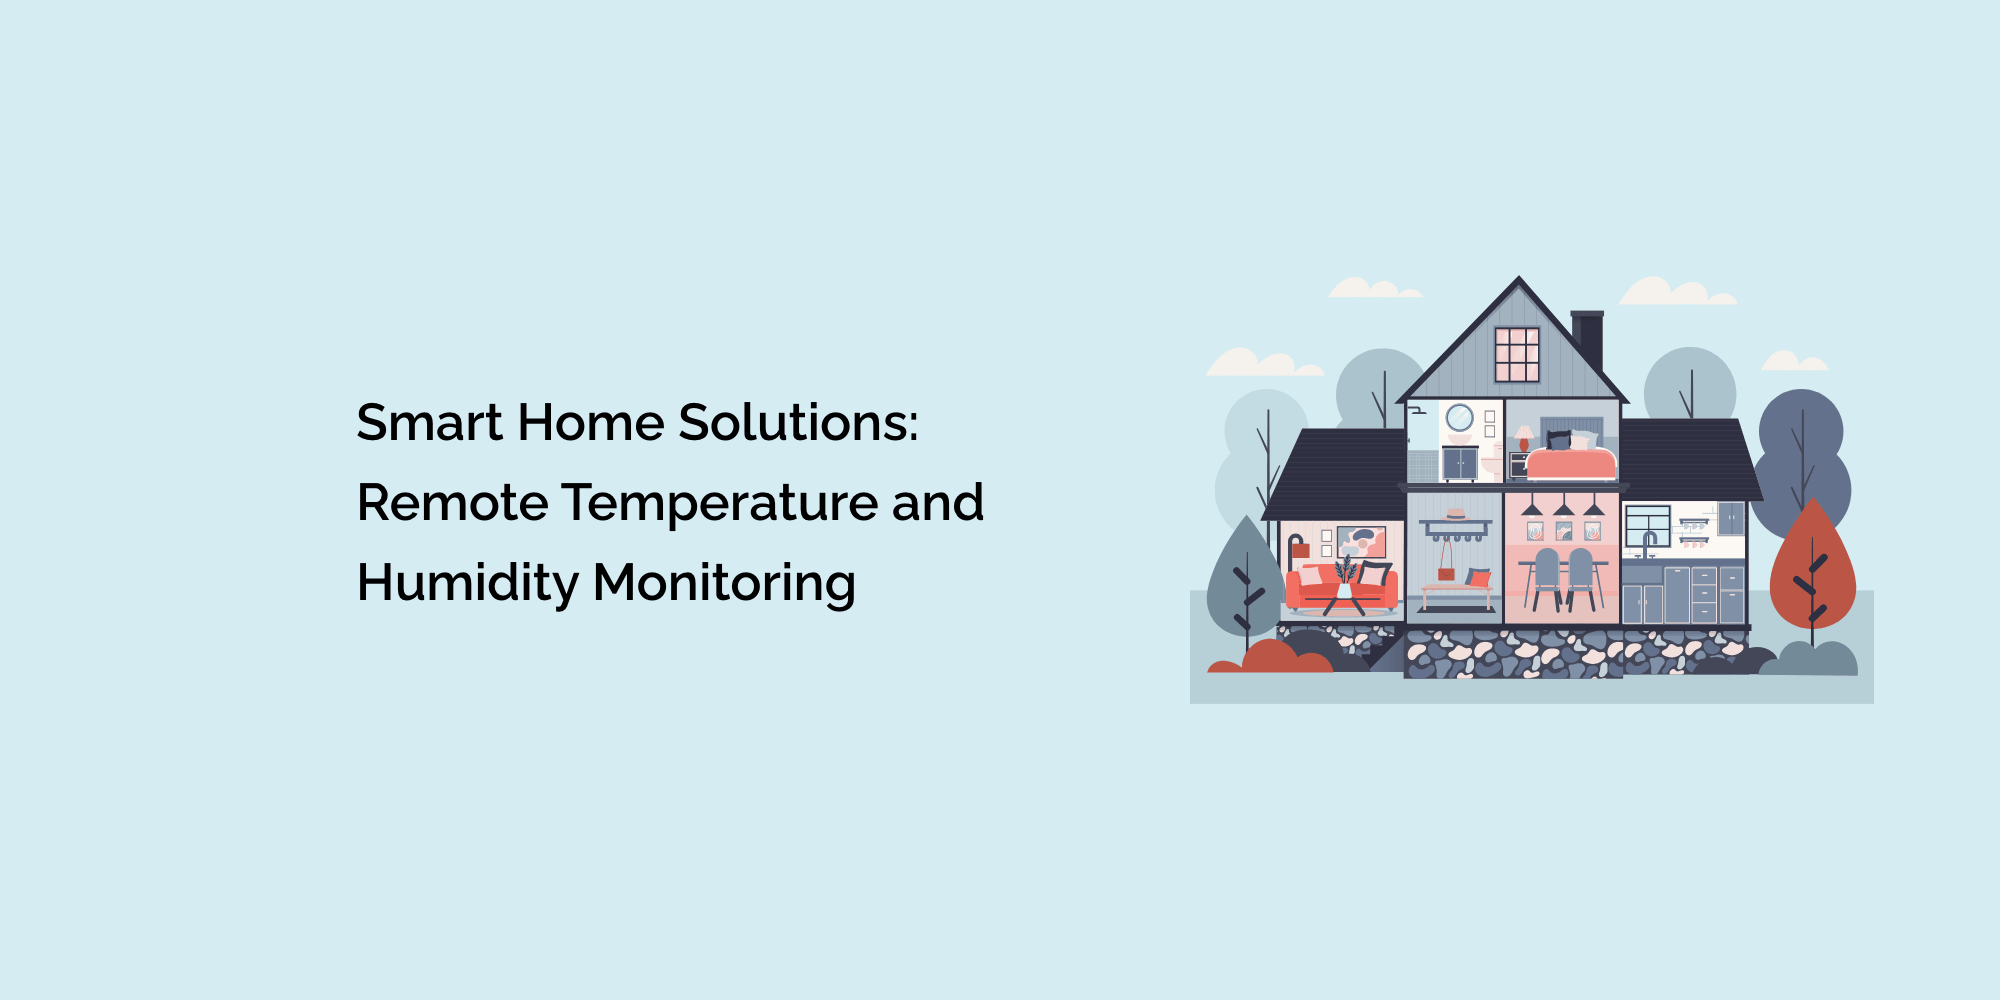 Smart Home Solutions: Remote Temperature and Humidity Monitoring